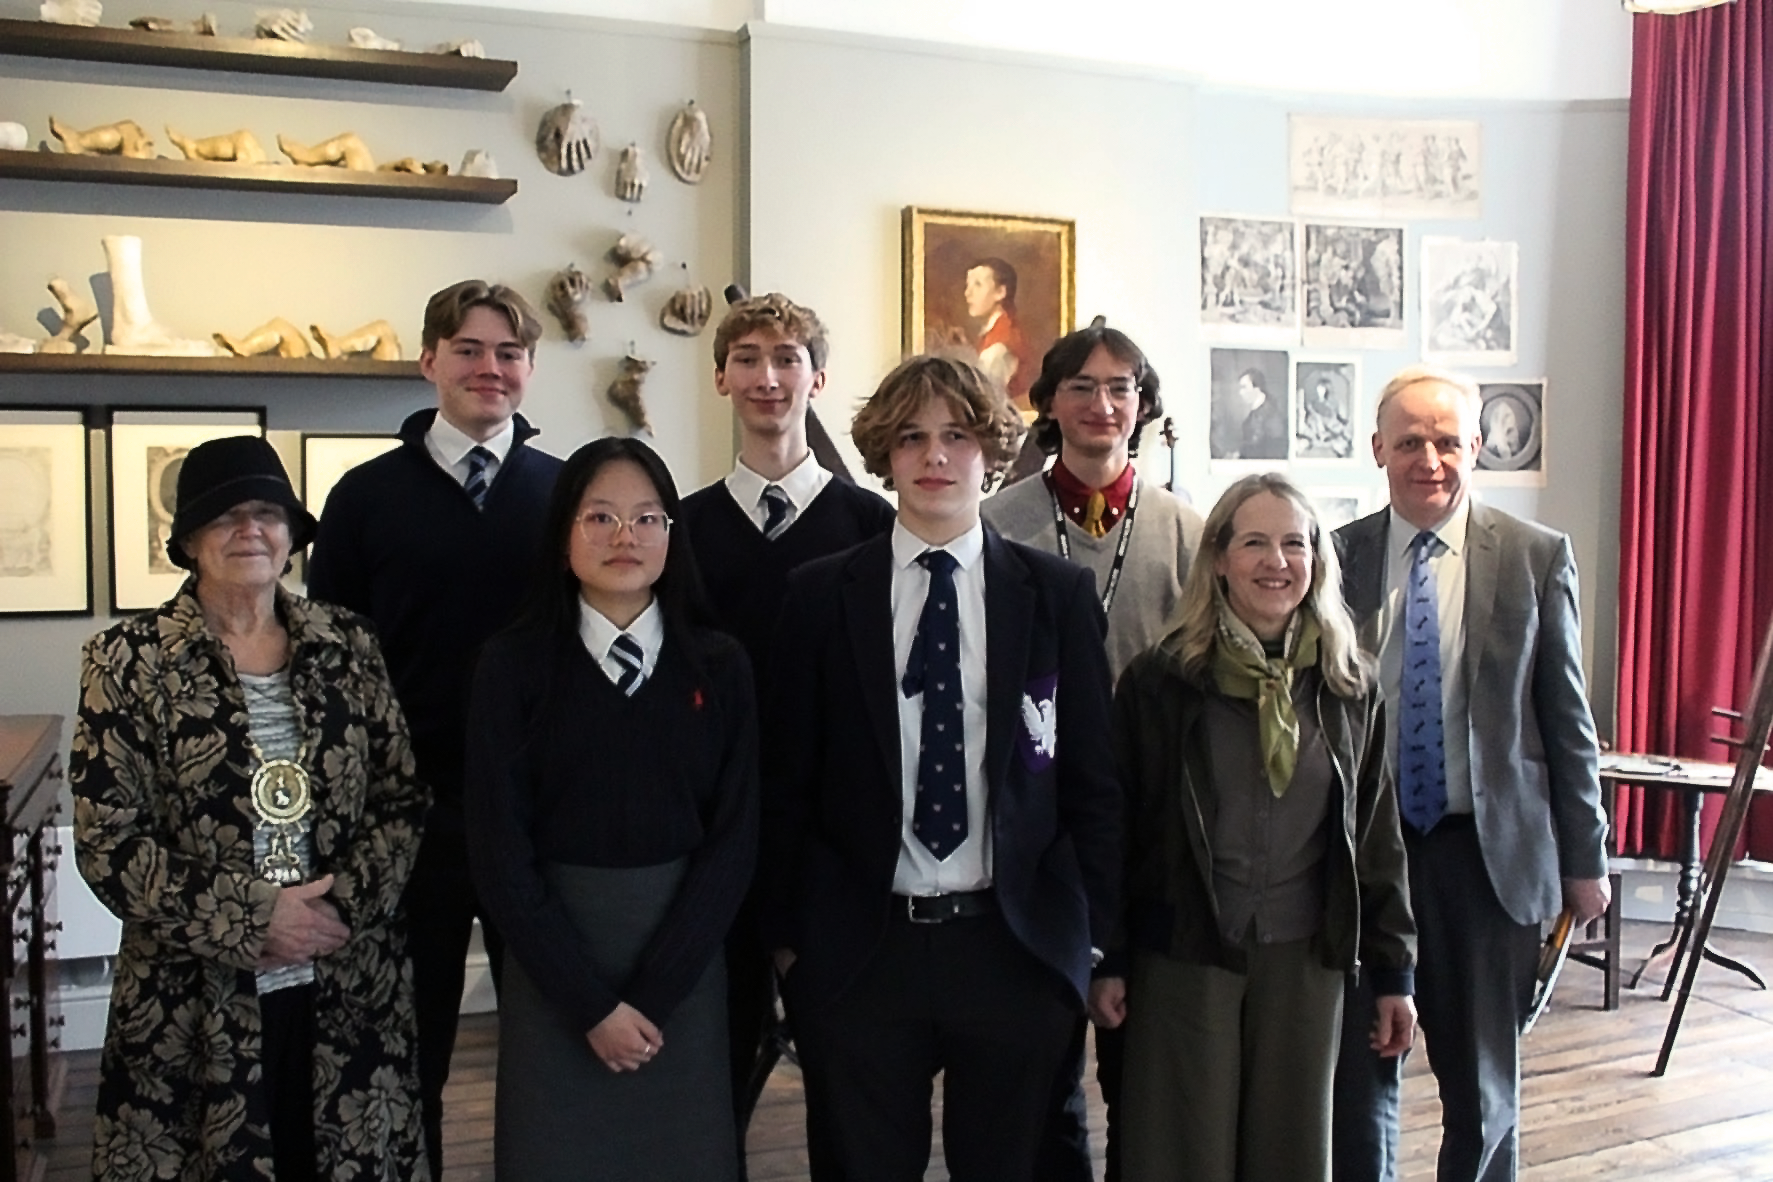 An image of all 5 student contestants. Pictured with the Mayor of Sudbury, Events Co-ordinator and Director of Gainsborough's House. They are all stood in the Finnis Scott Drawing Room.